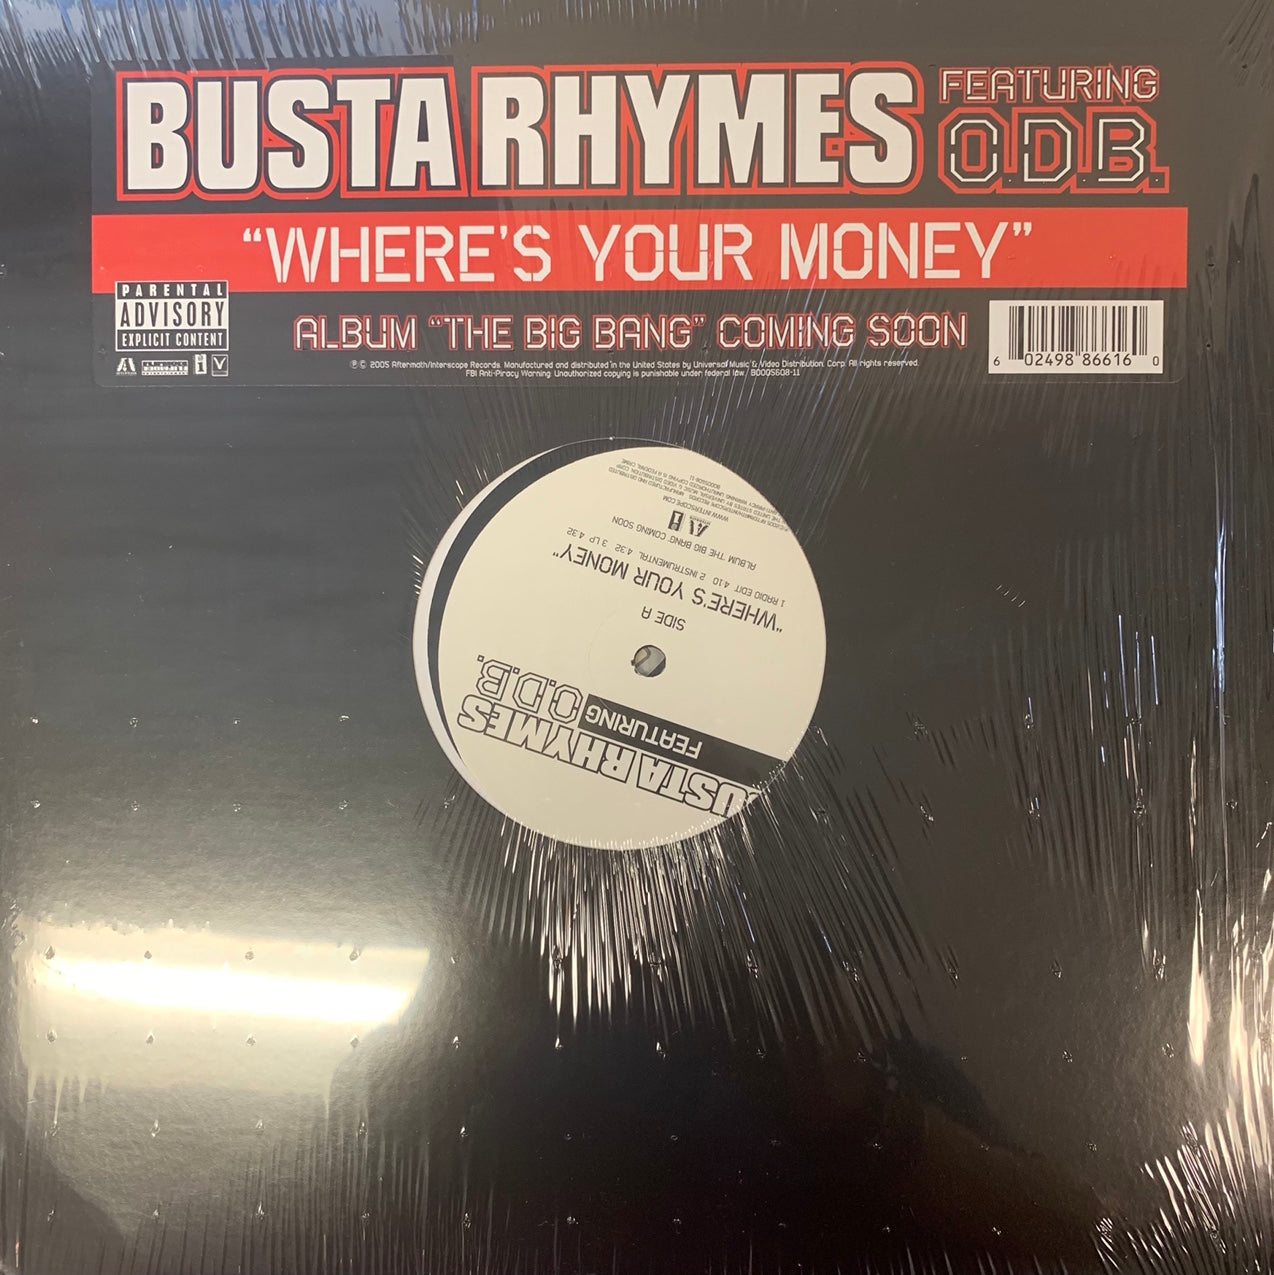 Busts Rhymes “Where’s Your Money” Feat ODB 4 Track 12inch Vinyl